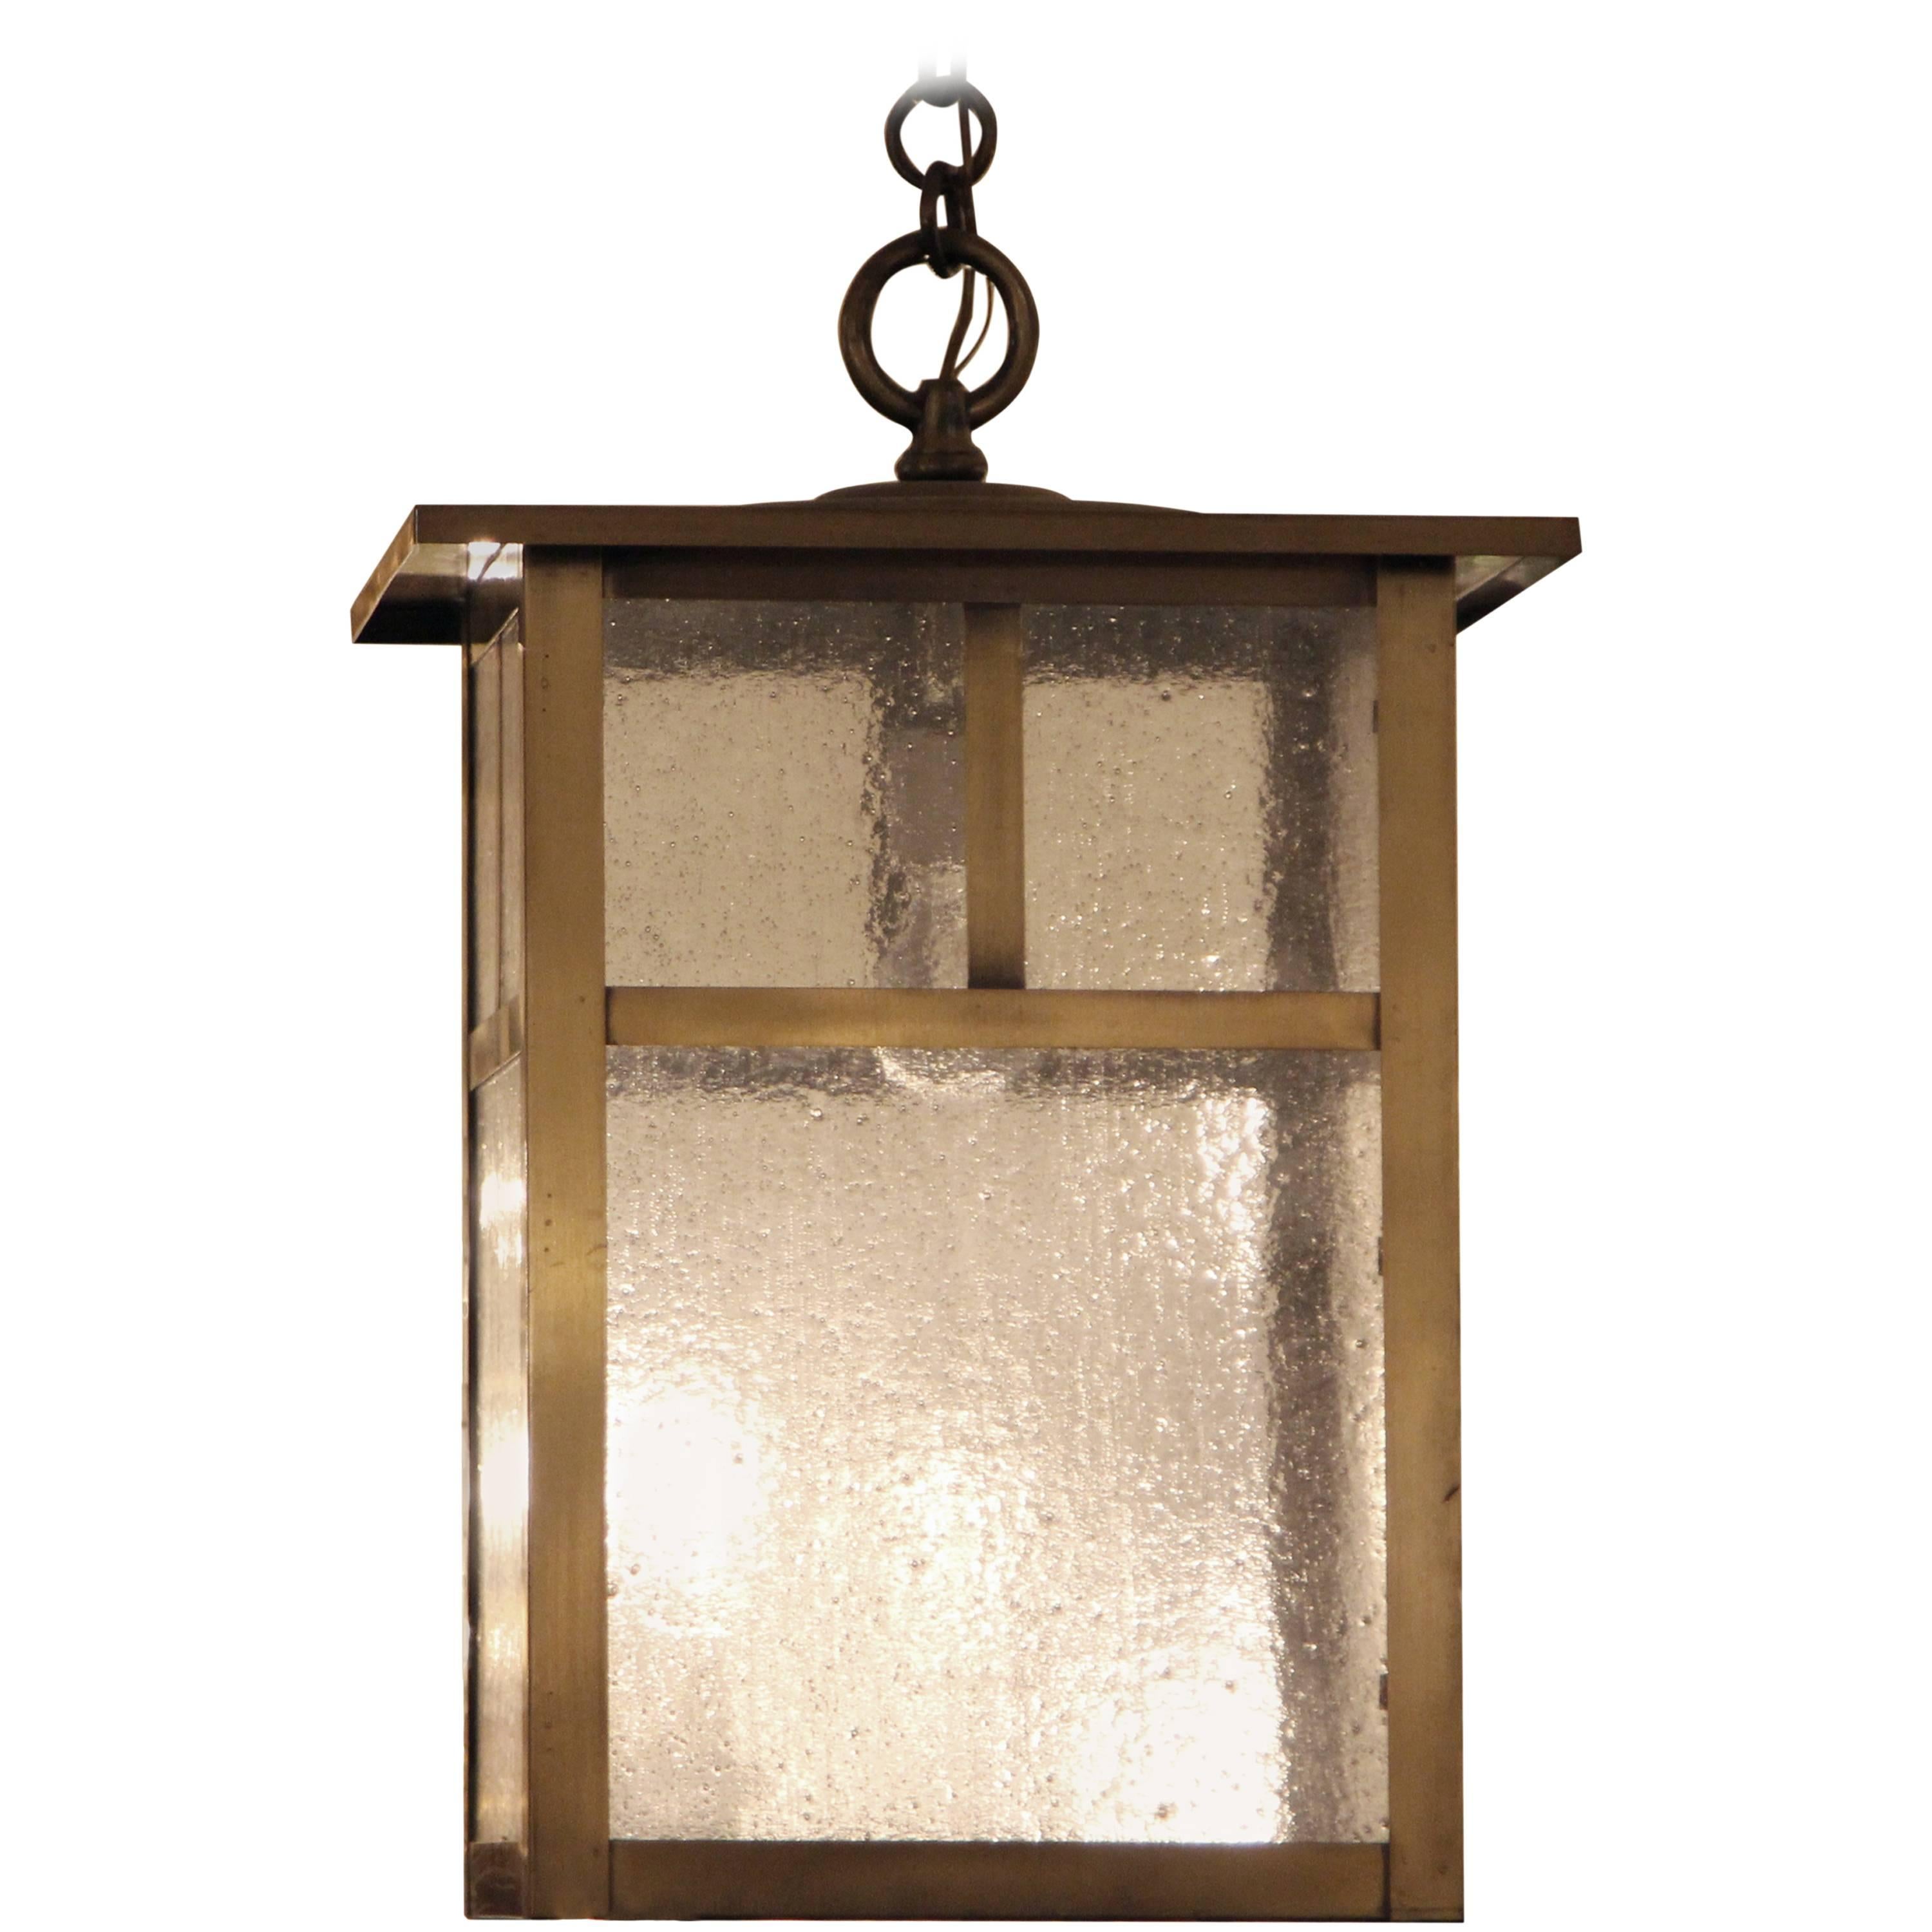 1980s Arts and Crafts Style Brass Lantern with Textured Clear Glass